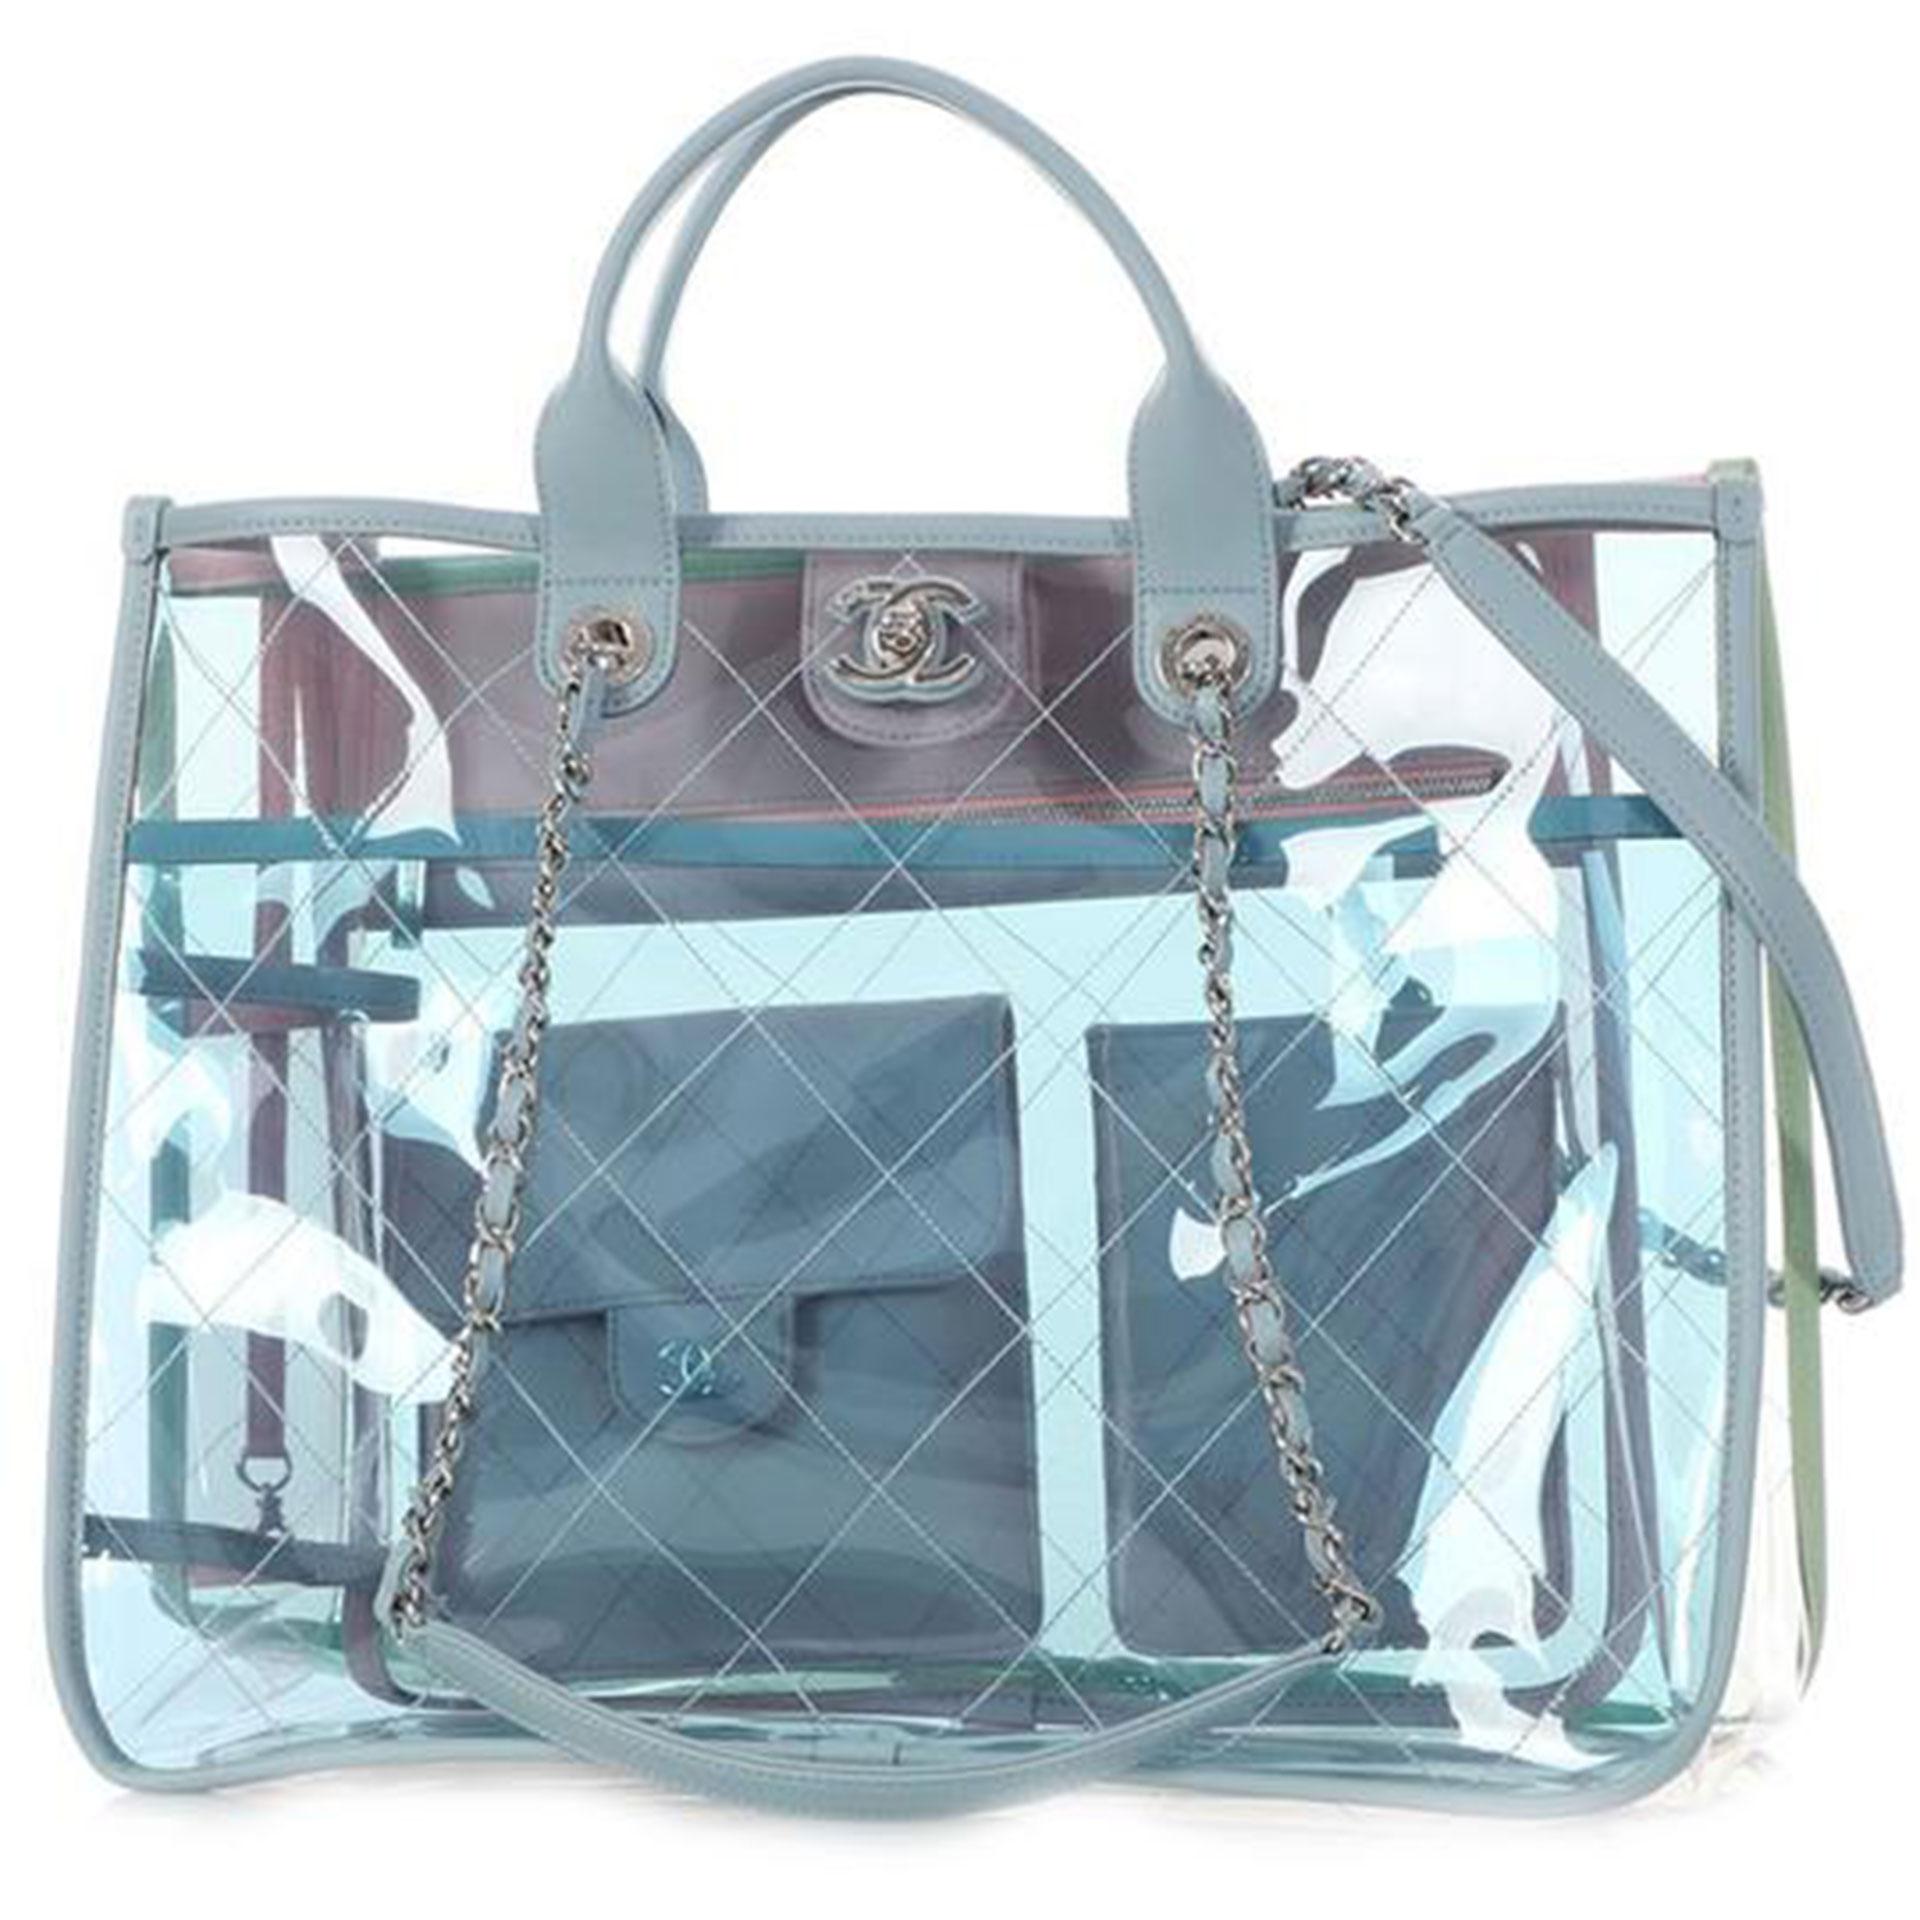 Coco Chanel Transparent Clear Shopping Tote Quilted PVC Lambskin

Year: 2019 
Silver hardware

Transparent blue, green, & clear PVC 
Tonal leather lining 
Leather top handles 
Handle drop: 4